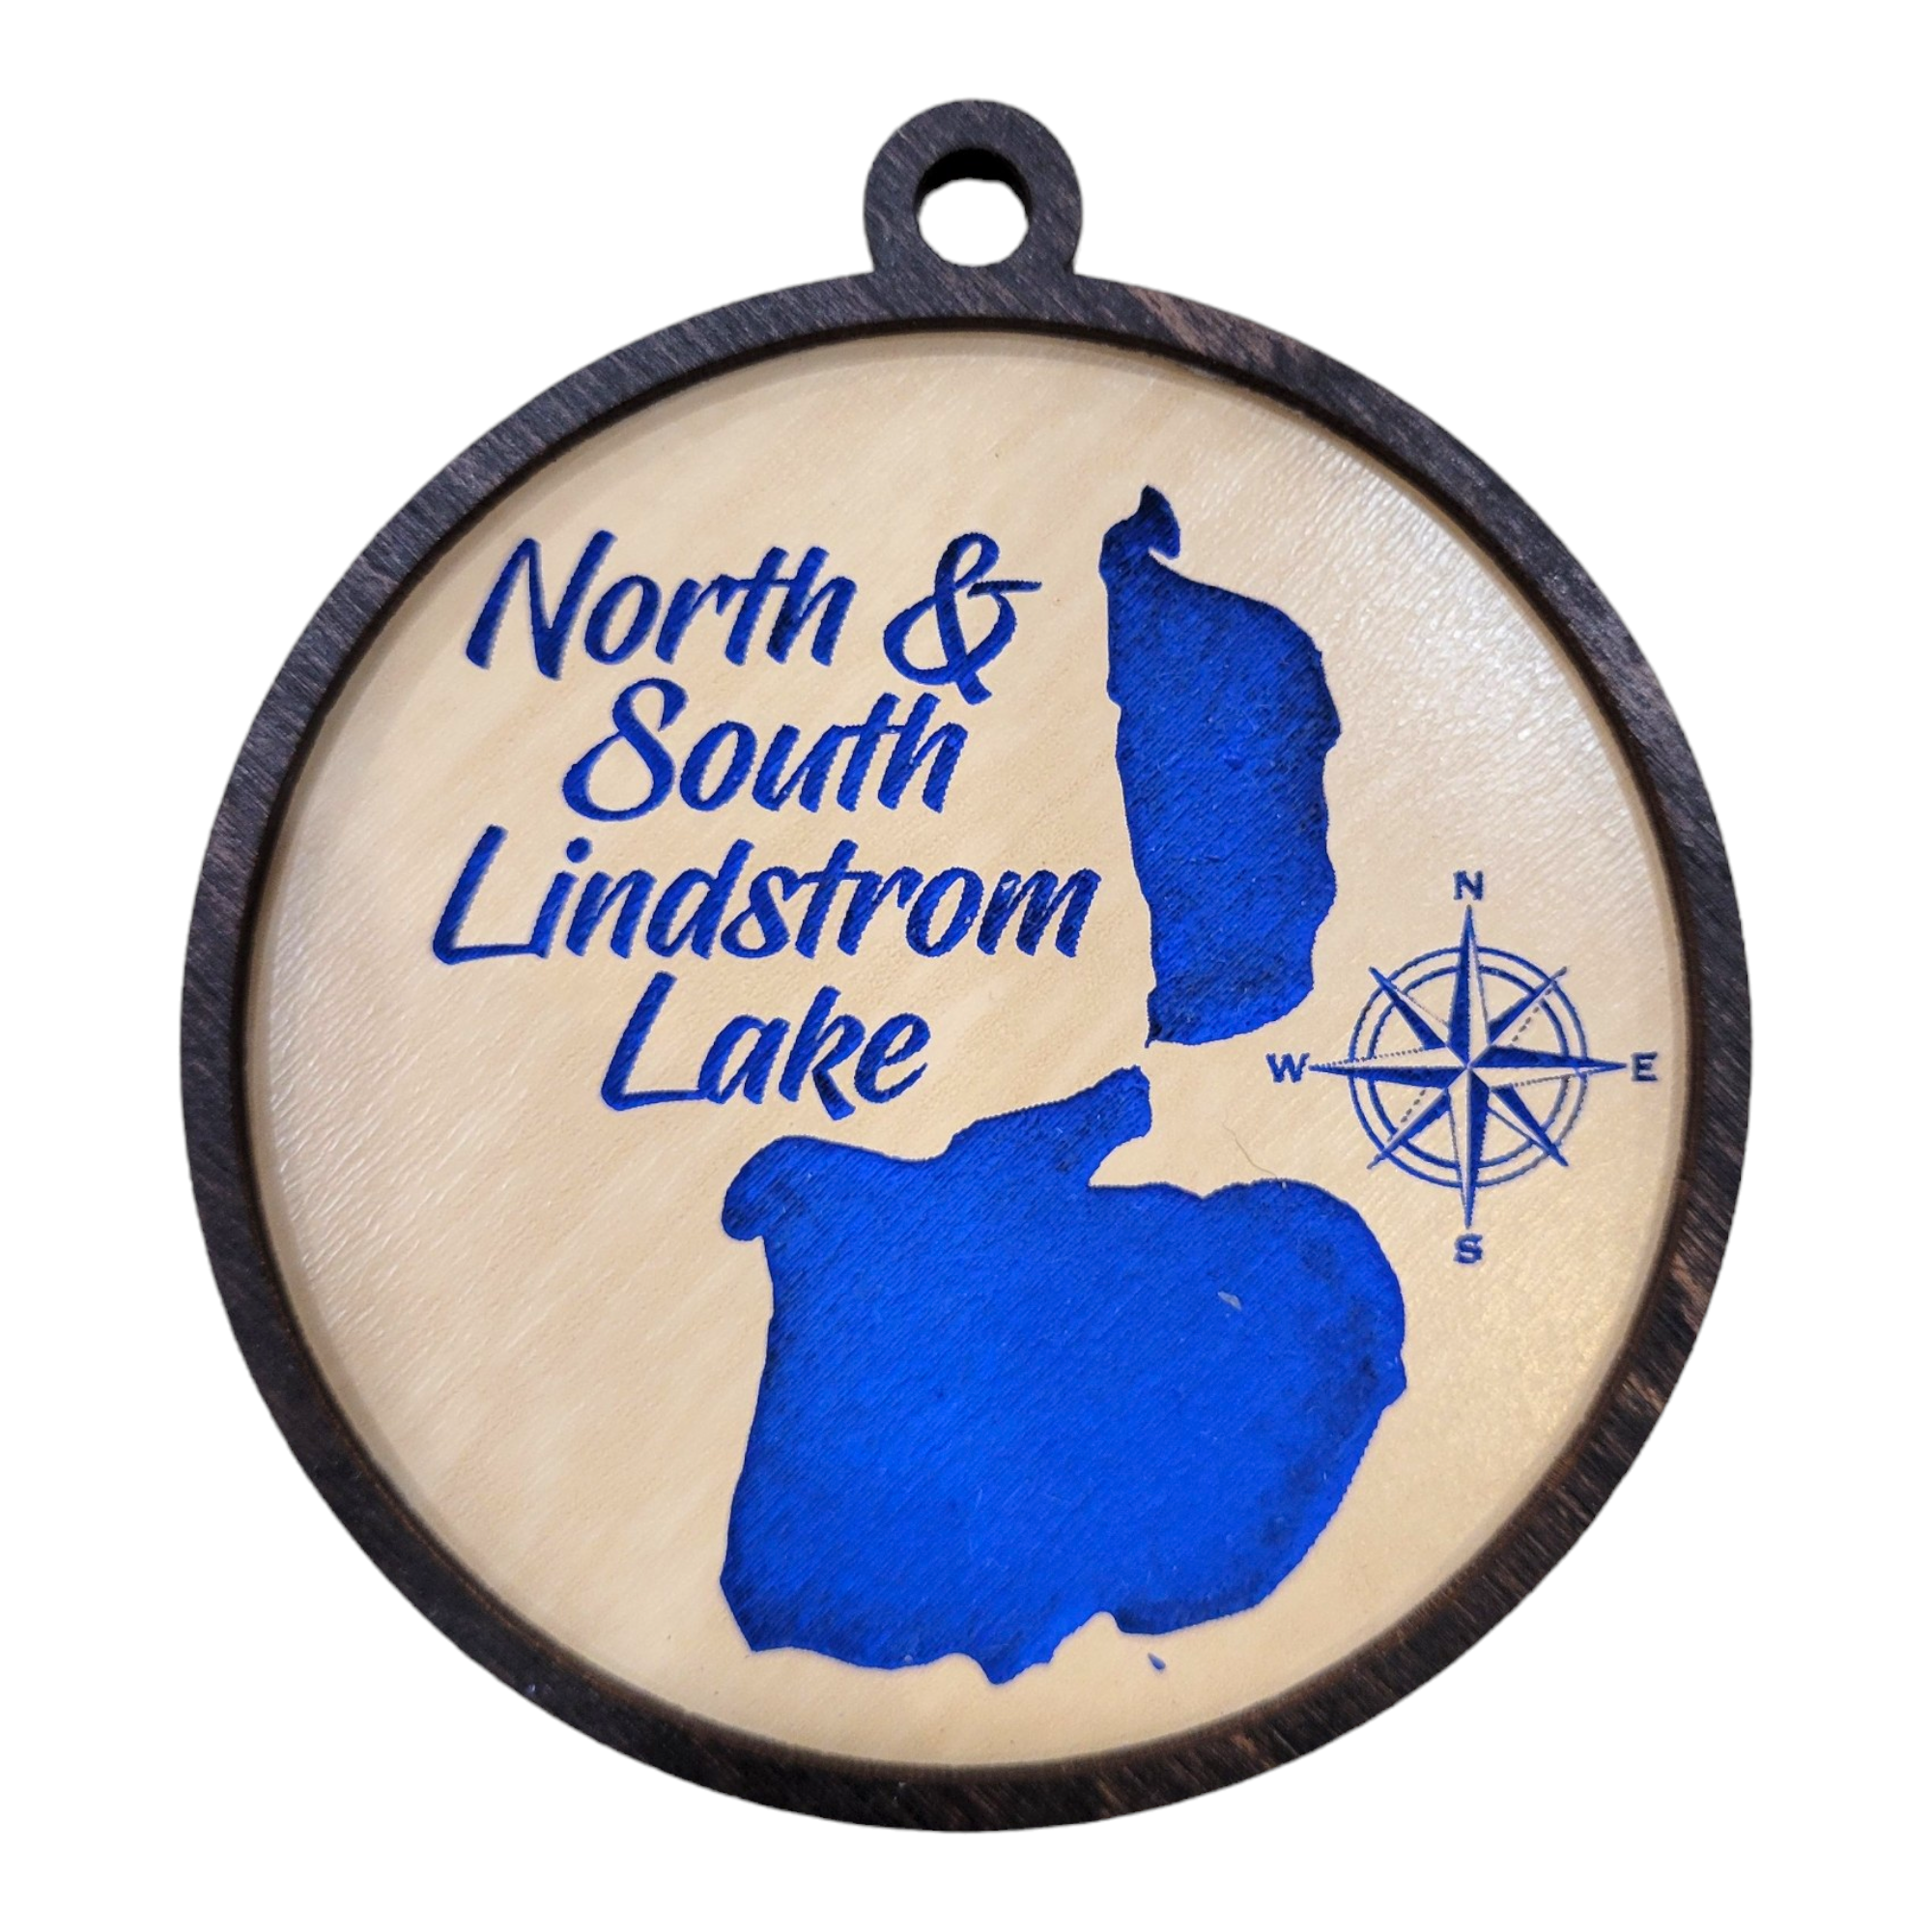 Ornament: North & South Lindstrom Lake - Round Etched Wood